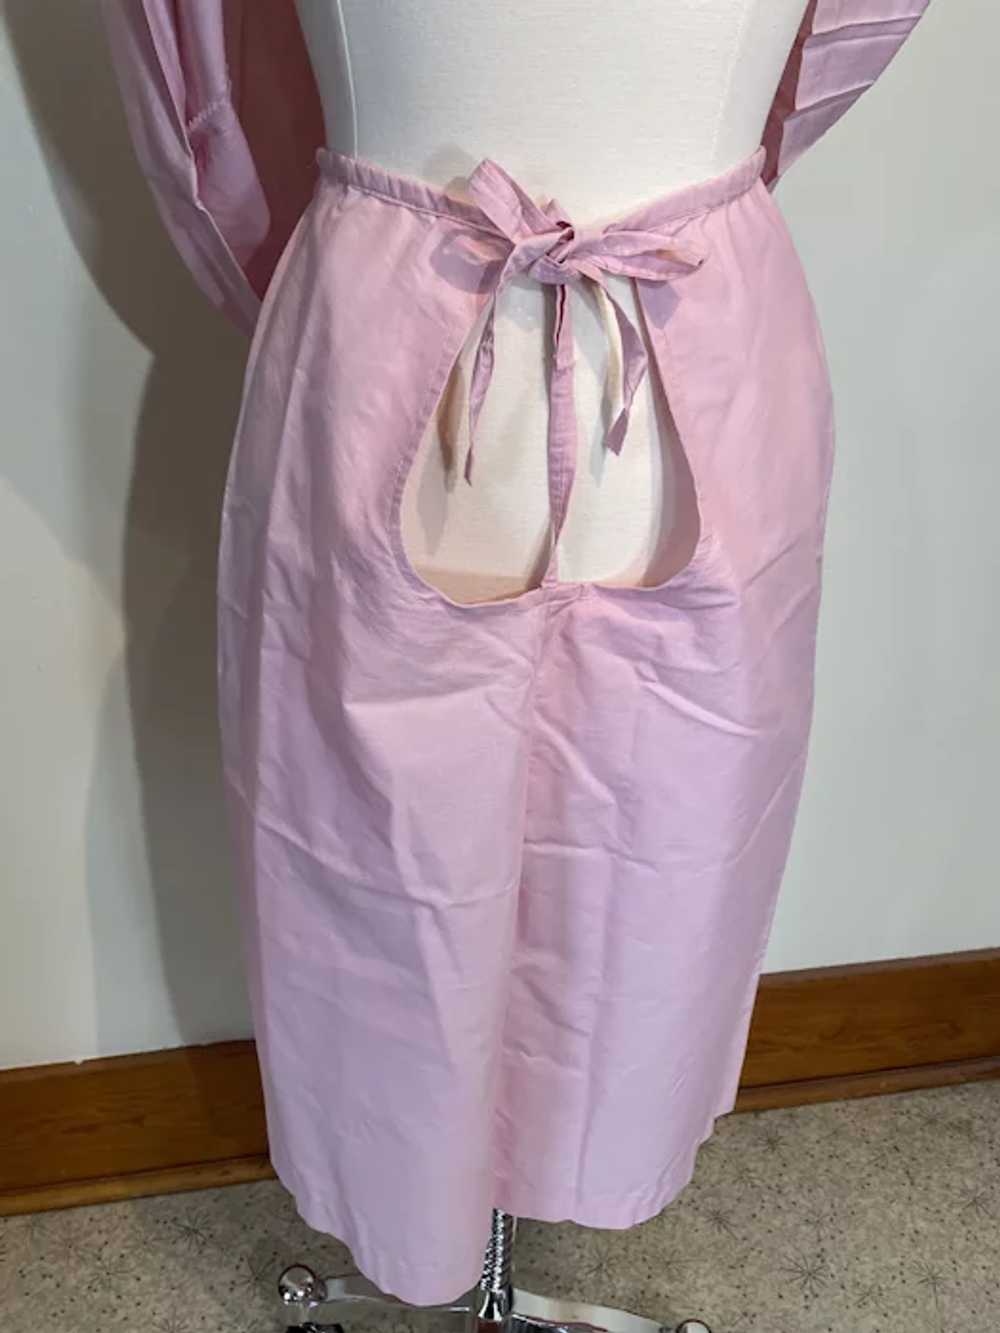 Vintage 1950s Pink Cotton Maternity Top and Skirt - image 6